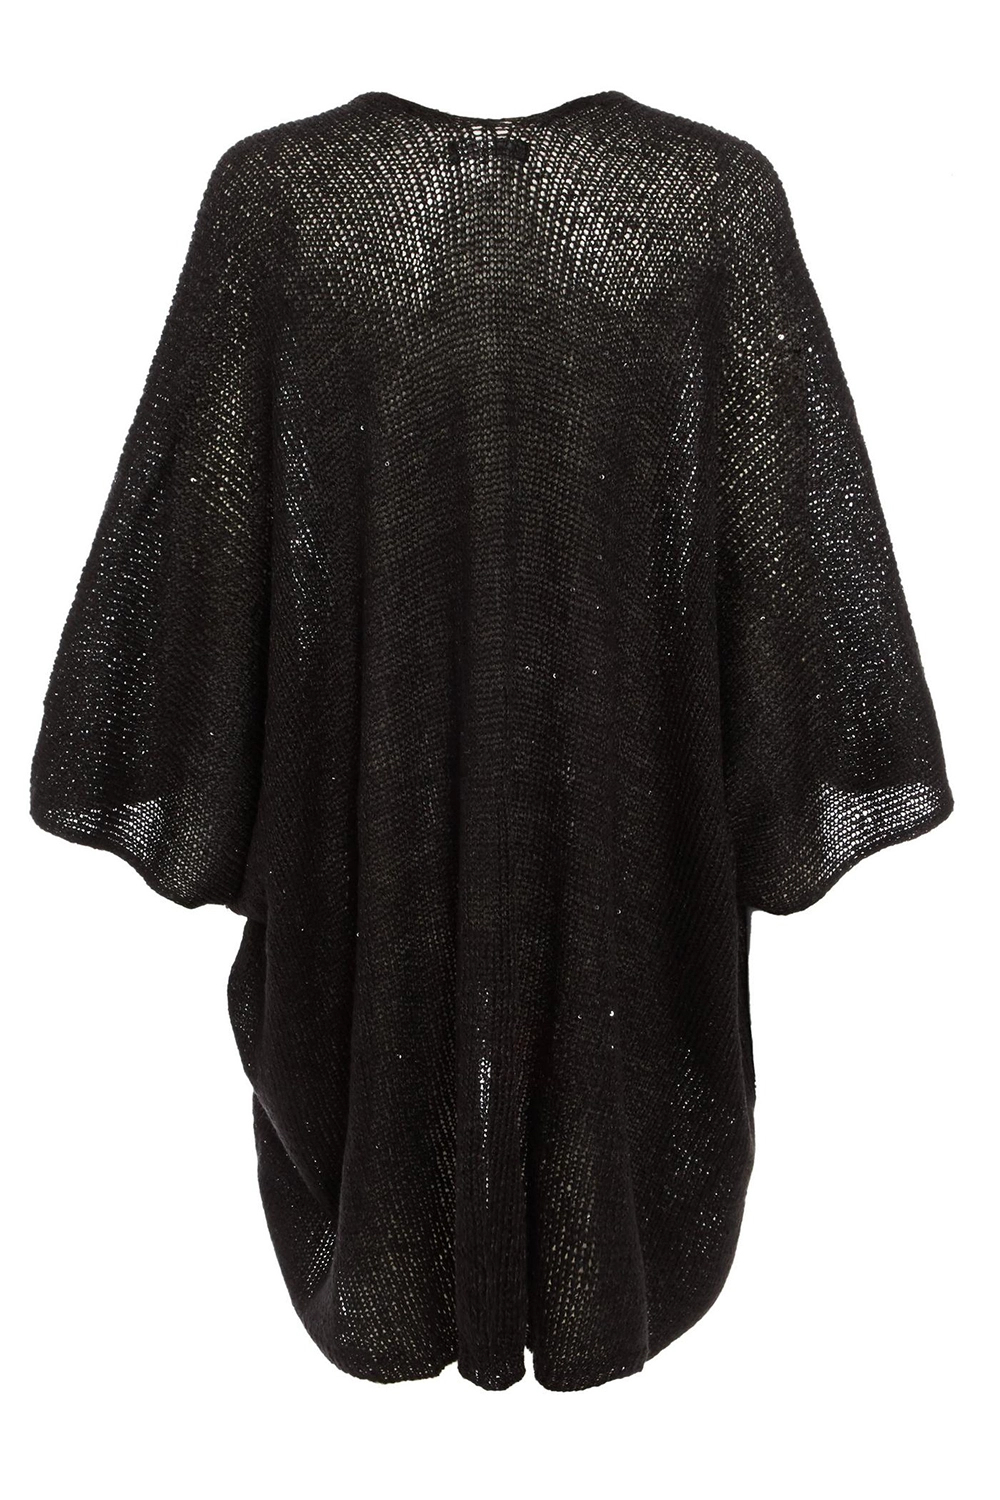 Black Knitted Sequin Cape